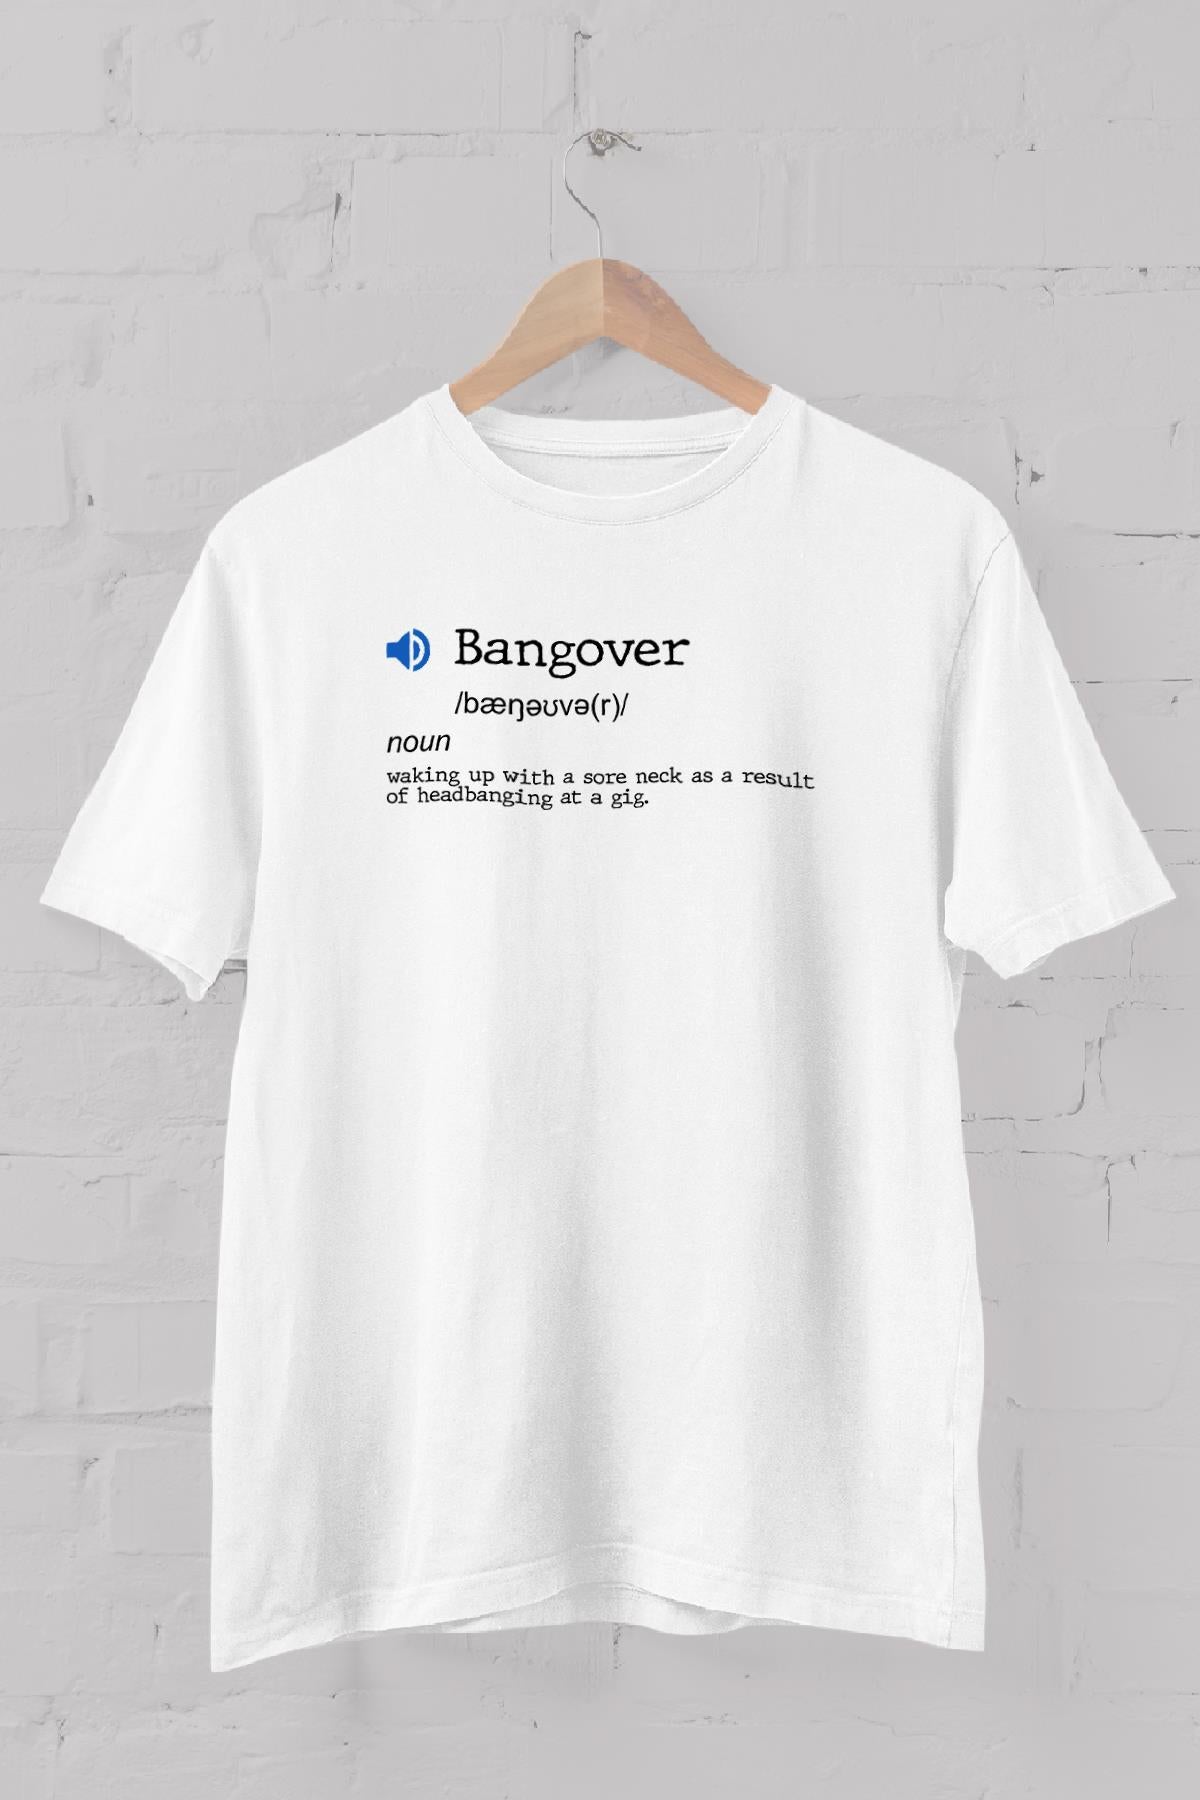 Fixed Words Dictionary "Bangover" Printed Crew Neck Men's T -shirt